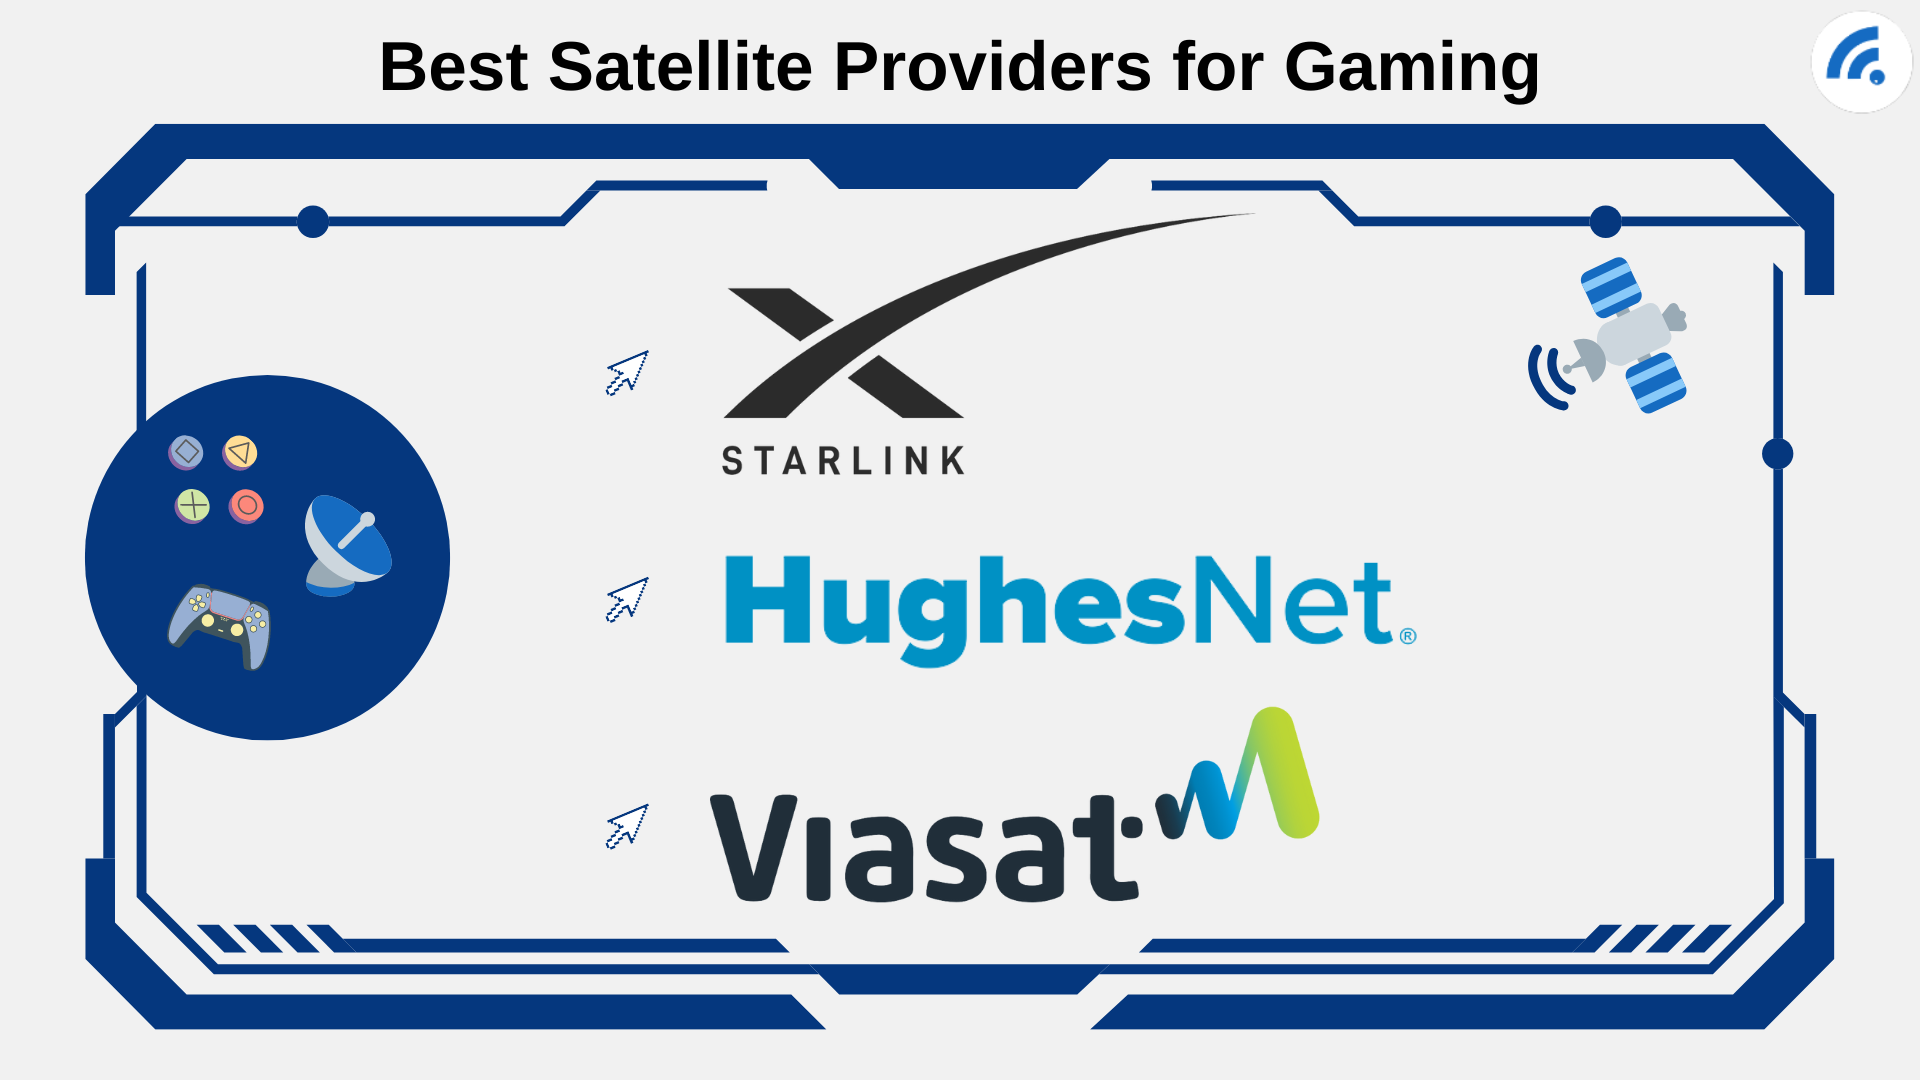 The Best Satellite Providers for Gaming